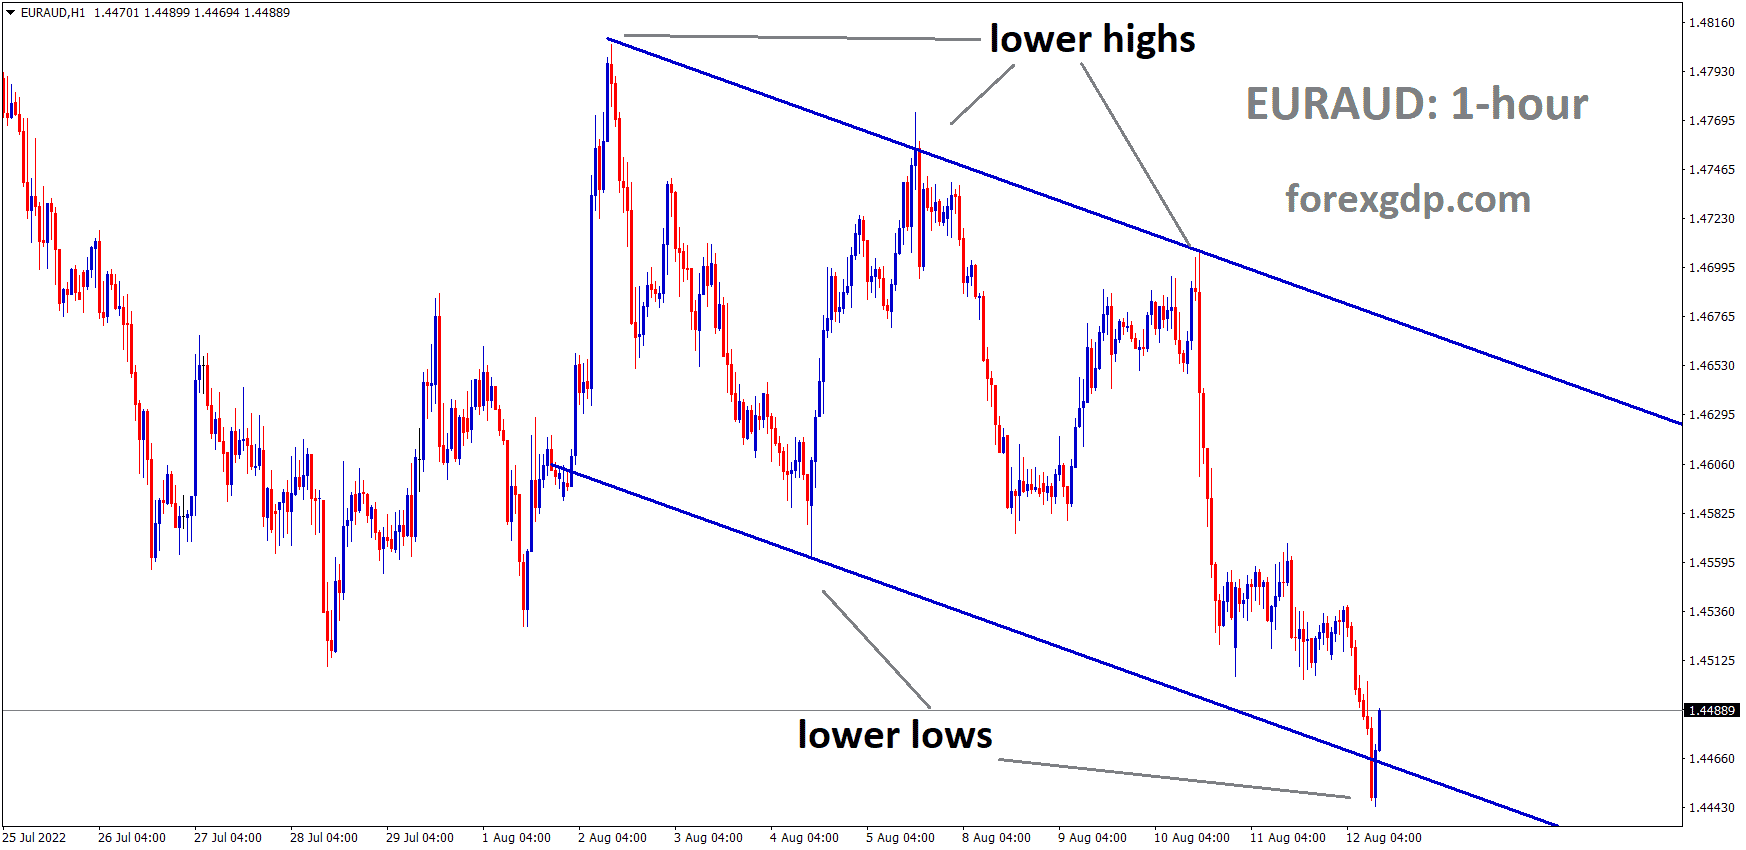 EURAUD is moving in the Descending channel and the Market has rebounded from the lower low area of the channel